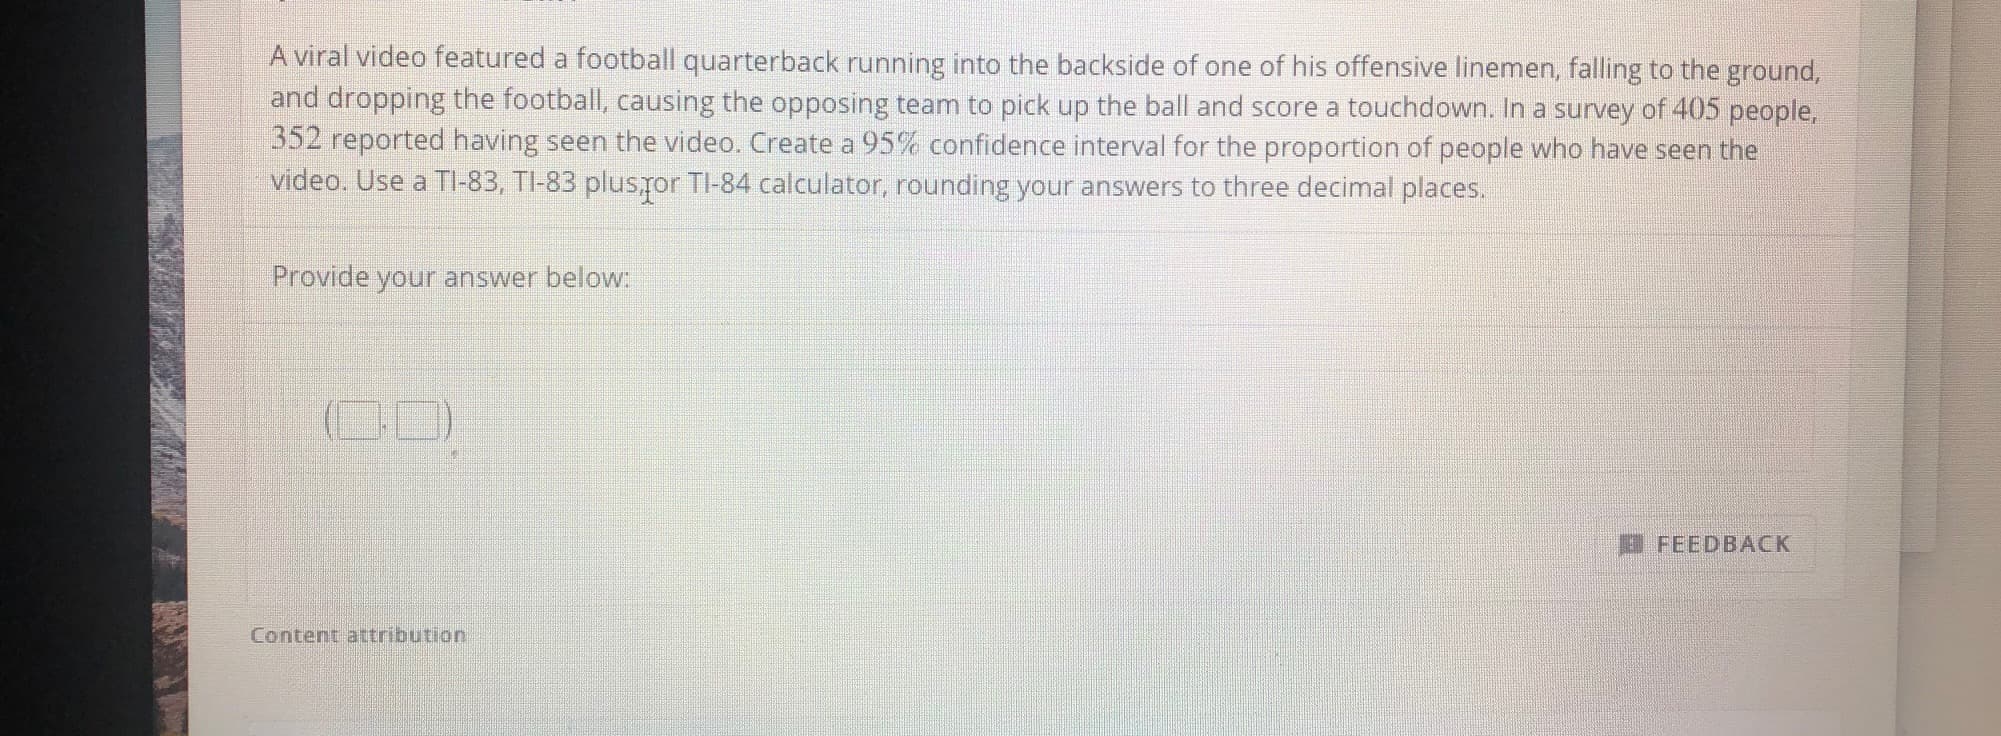 A viral video featured a football quarterback running into the backside of one of his offensive linemen, falling to the ground,
and dropping the football, causing the opposing team to pick up the ball and score a touchdown. In a survey of 405 people,
352 reported having seen the video. Create a 95% confidence interval for the proportion of people who have seen the
video. Use a TI-83, TI-83 plusror TI-84 calculator, rounding your answers to three decimal places.
Provide your answer below:
OD)
